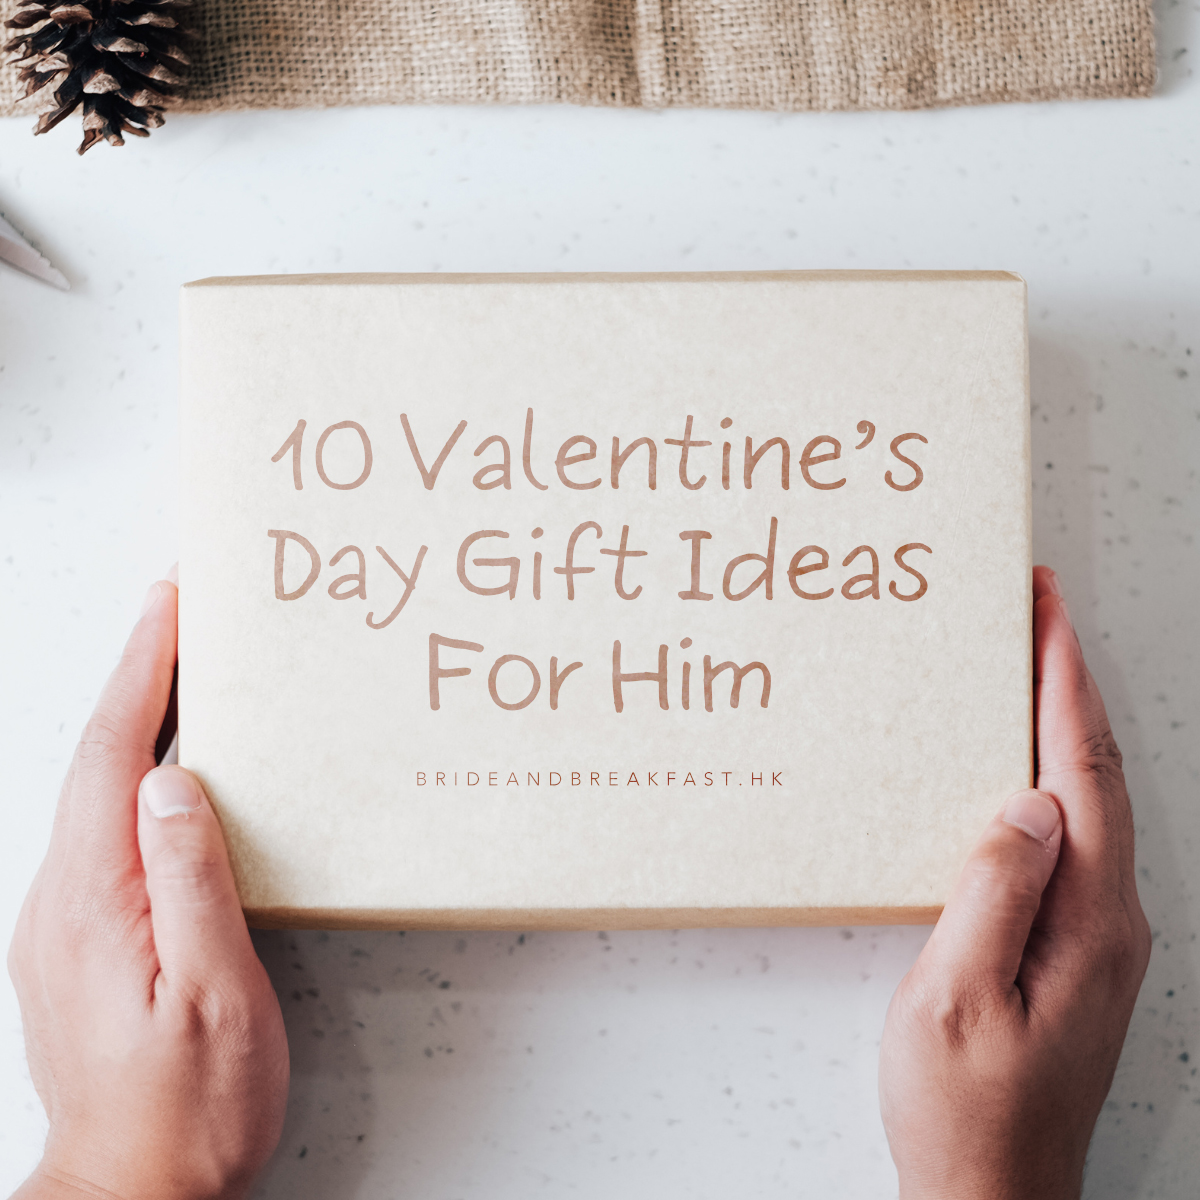 Best Gift for Friend's Marriage – Between Boxes Gifts